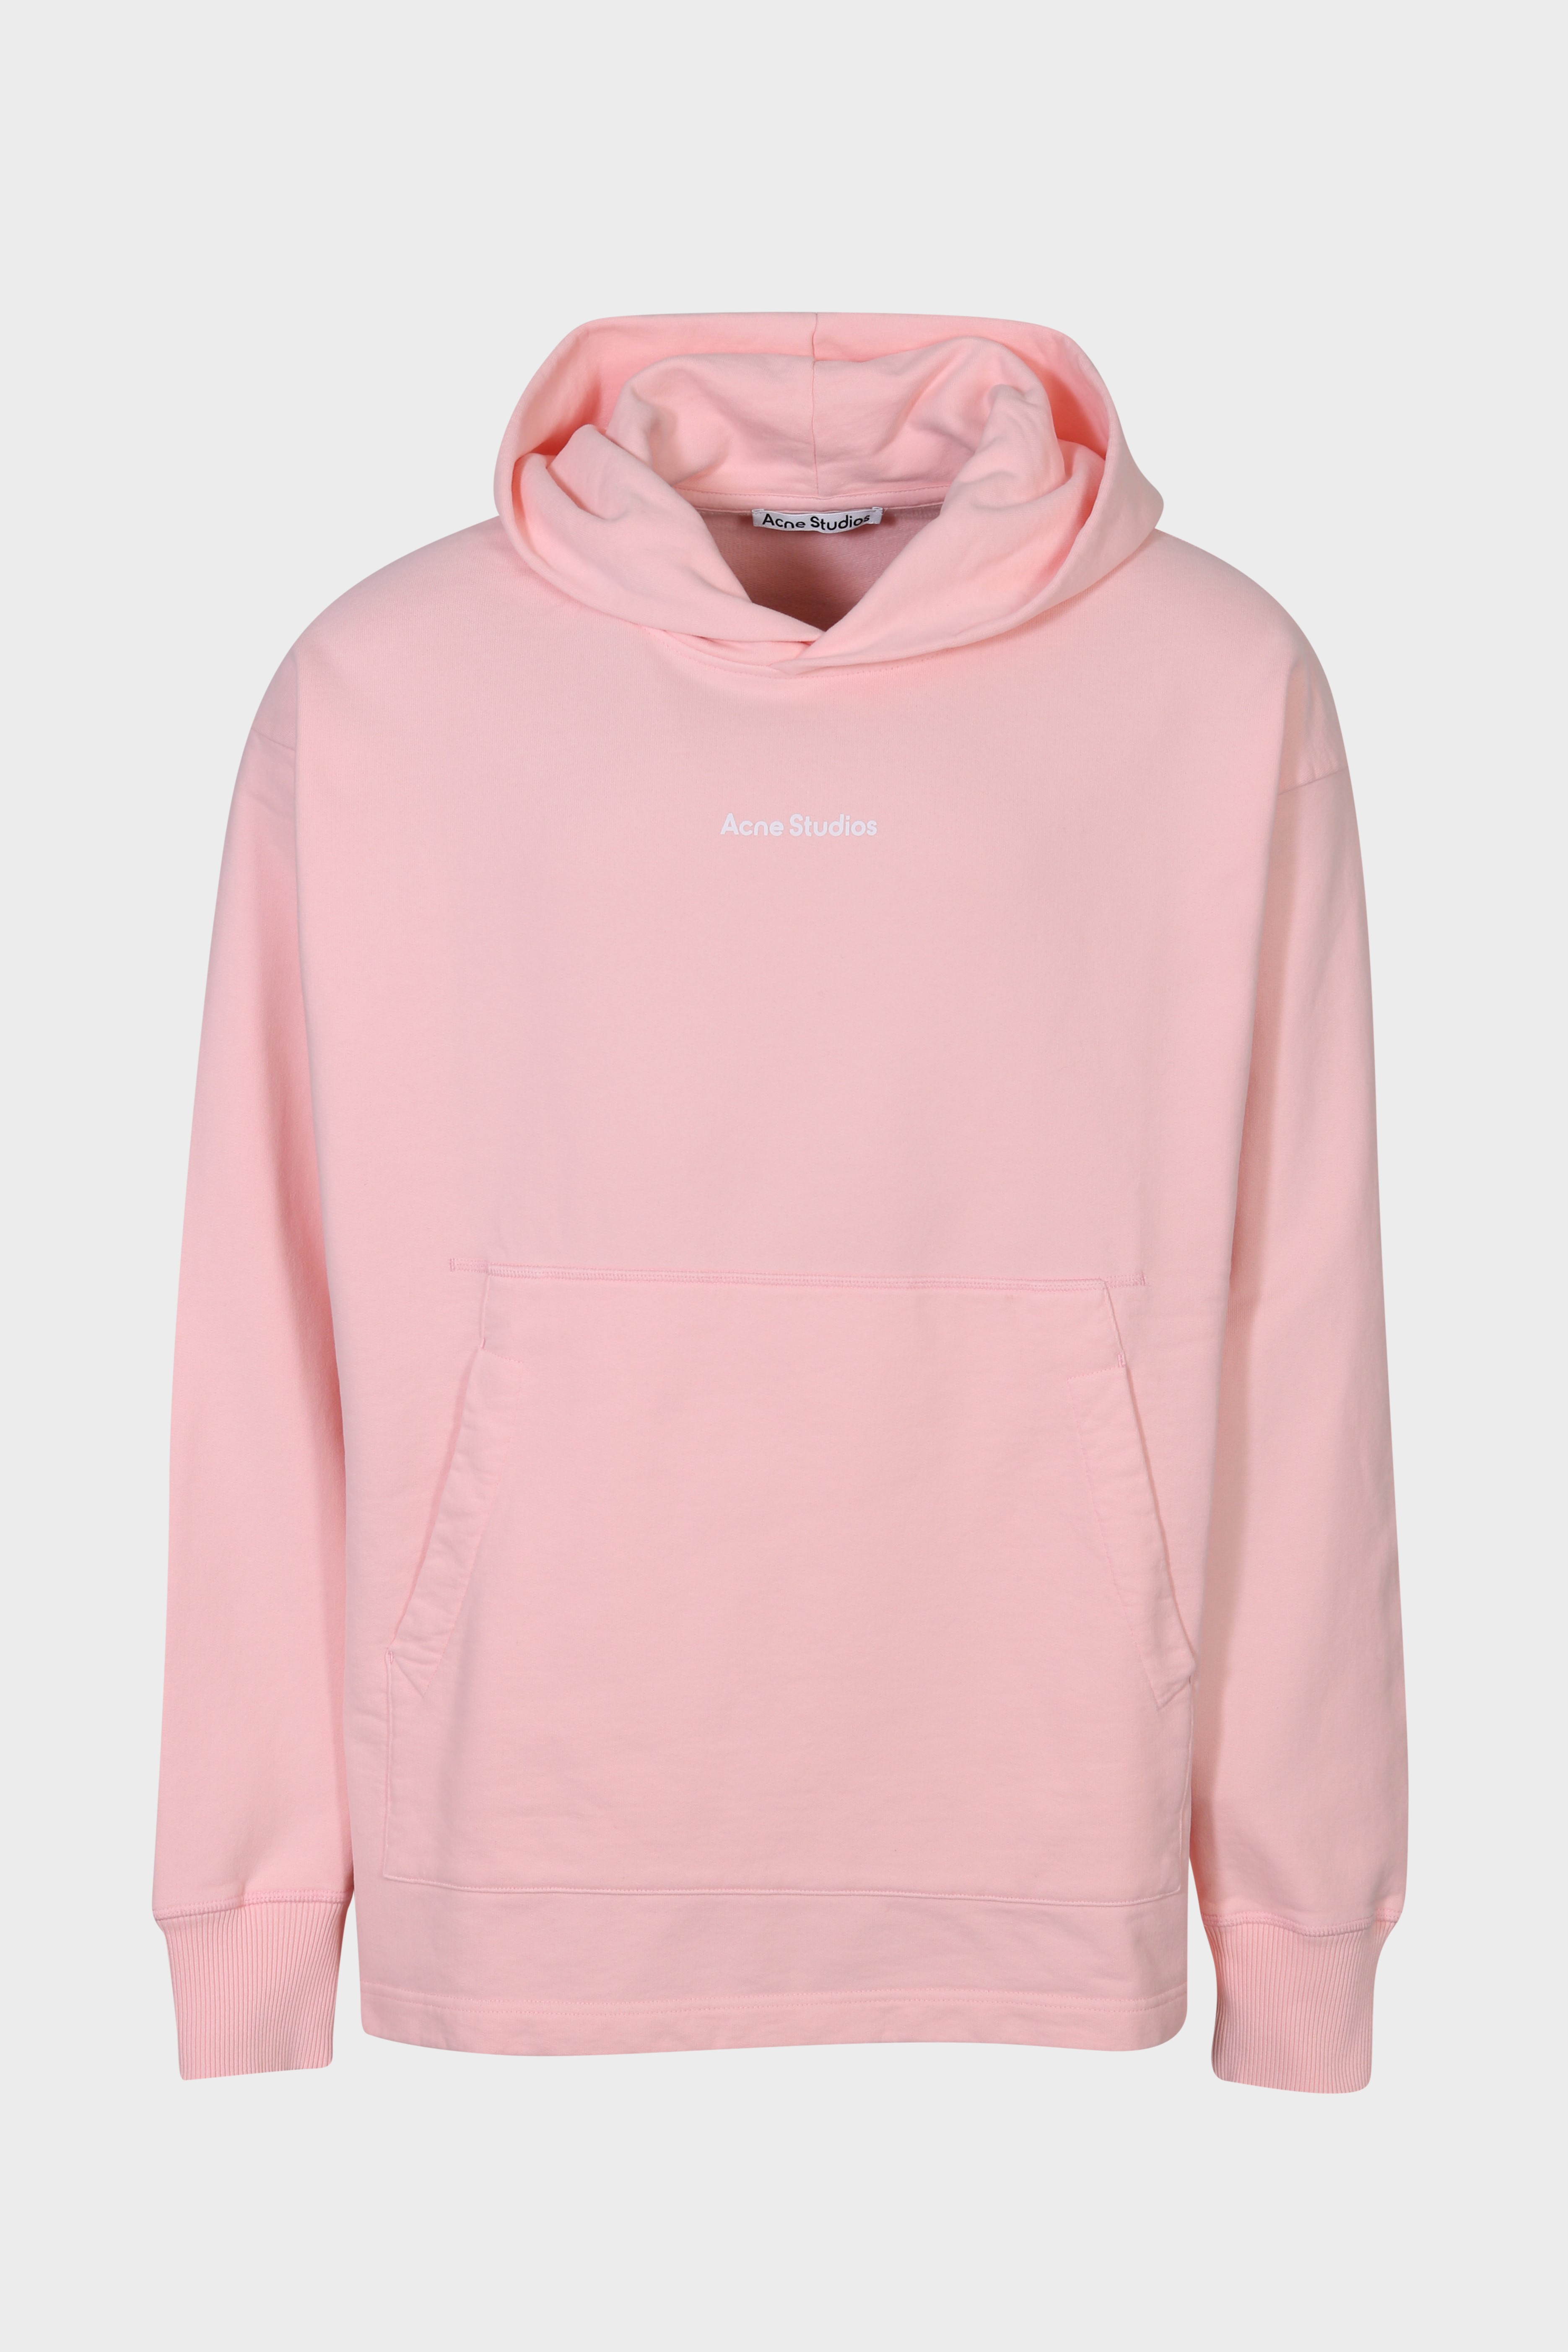 ACNE STUDIOS Stamp Oversize Sweathoodie in Pale Pink